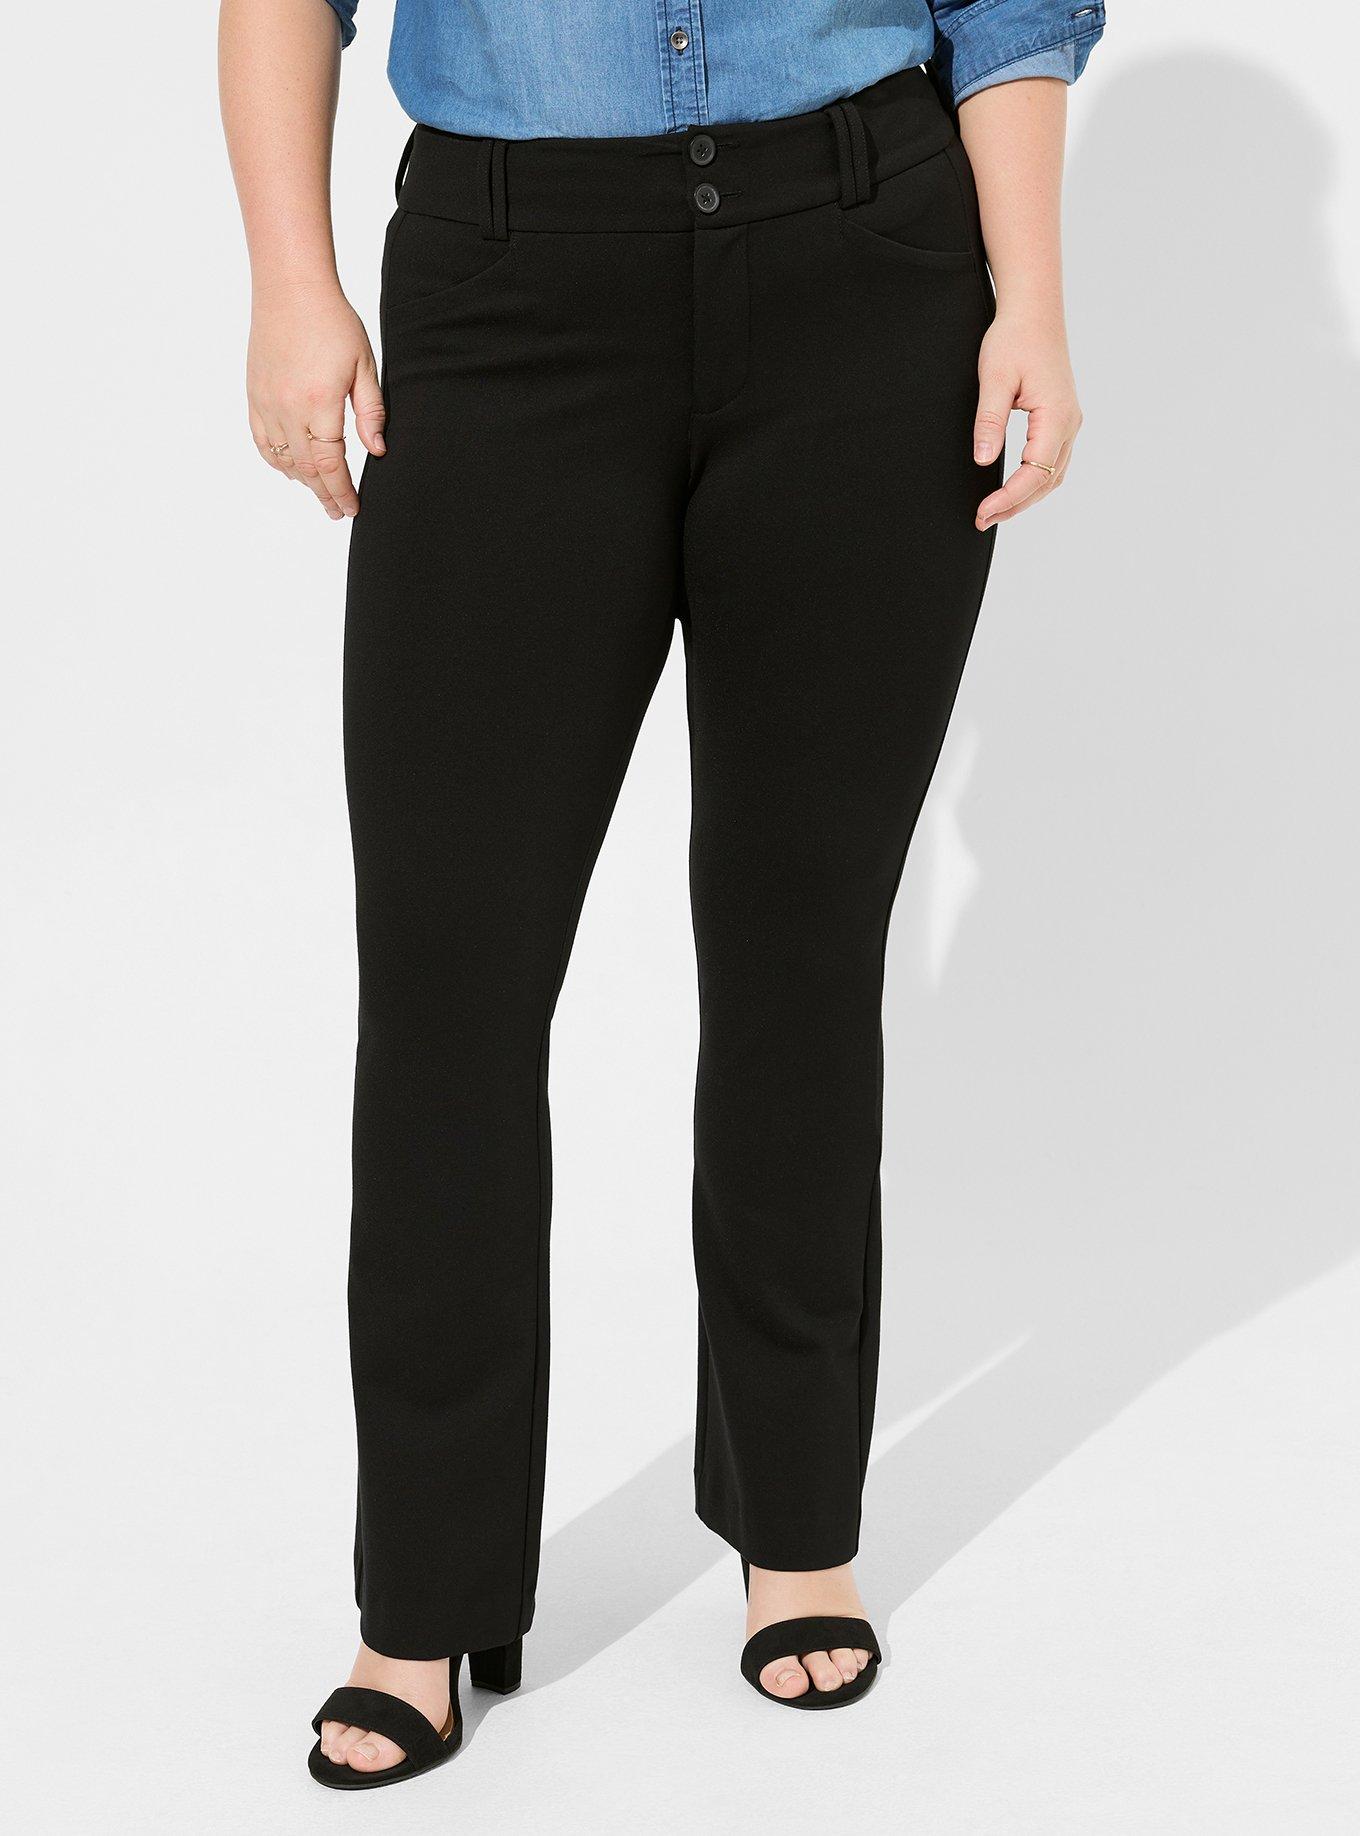 Motel Tailored Bootcut Stretch Pants - Black